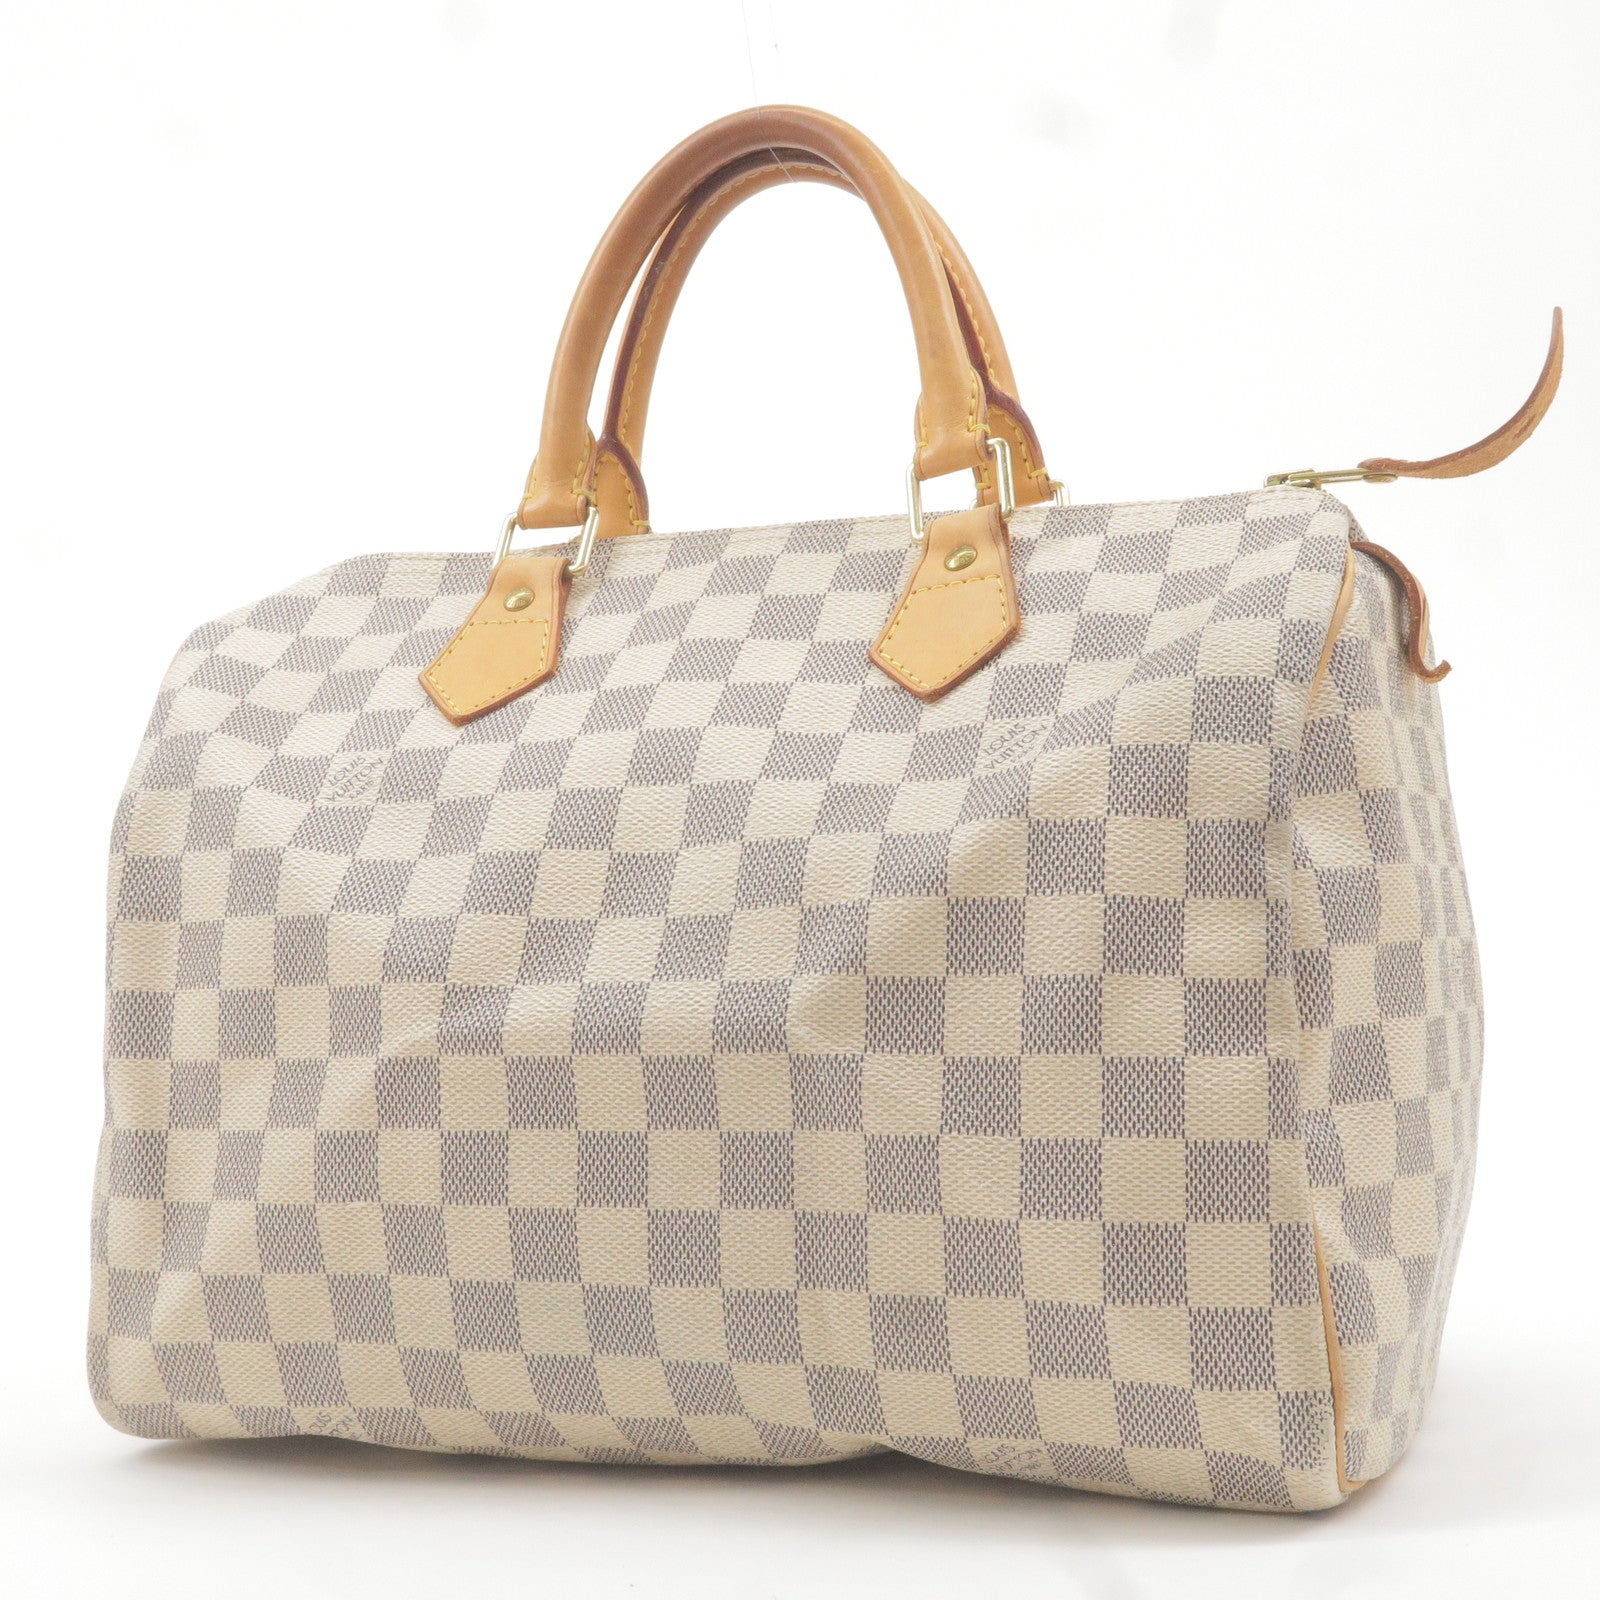 Vintage Bags UK - Louis Vuitton Trotteur Bag Very similar to the pochette,  most Trotteur bags have the cross body strap, so this one has been replaced  by a short strap at